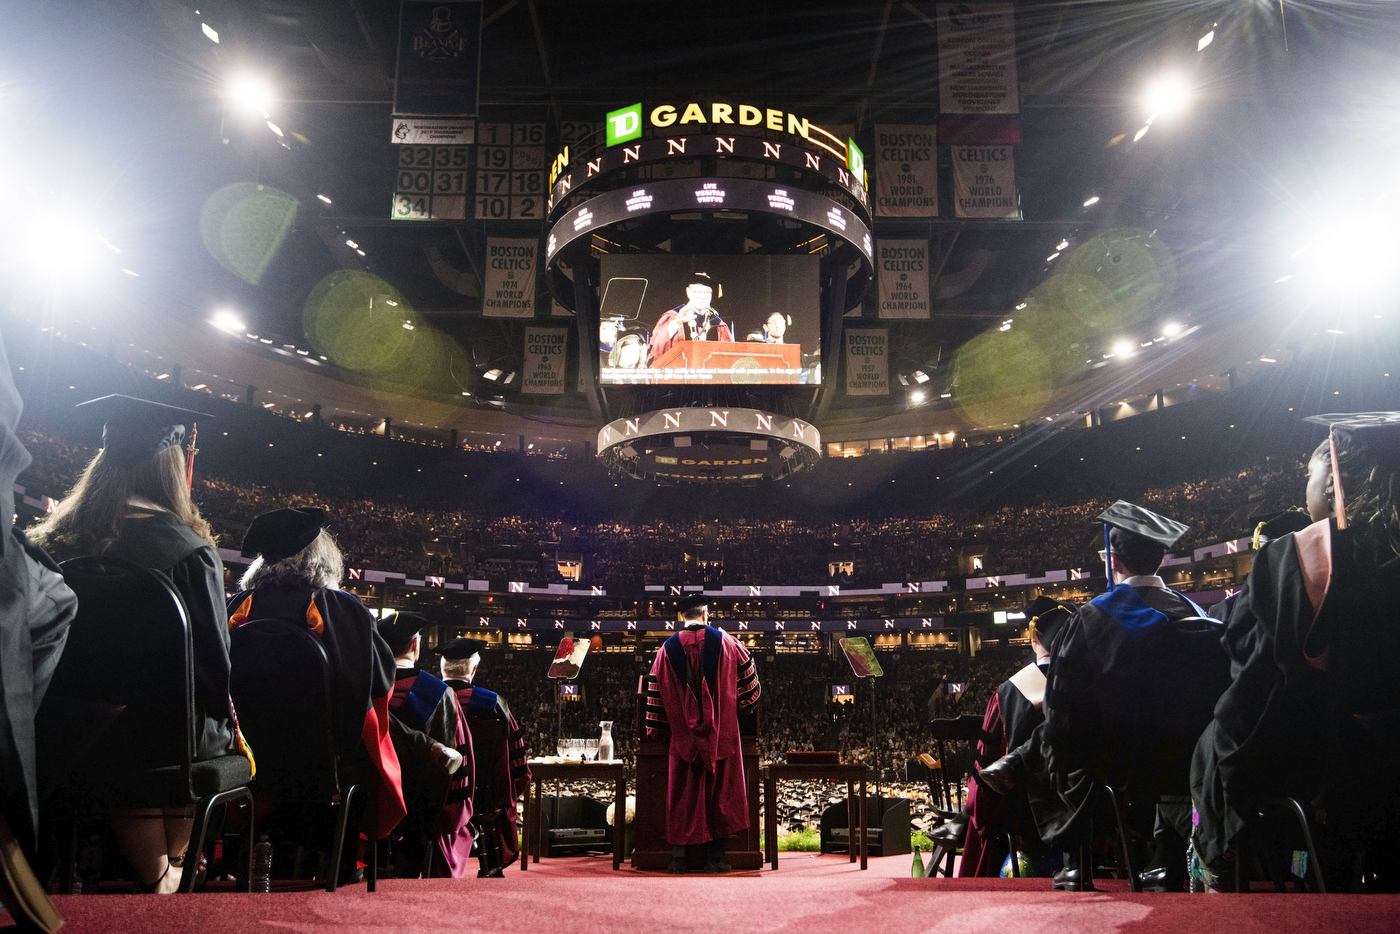 More than 4,000 students received diplomas at Commencement, which was held at TD Garden in Boston.